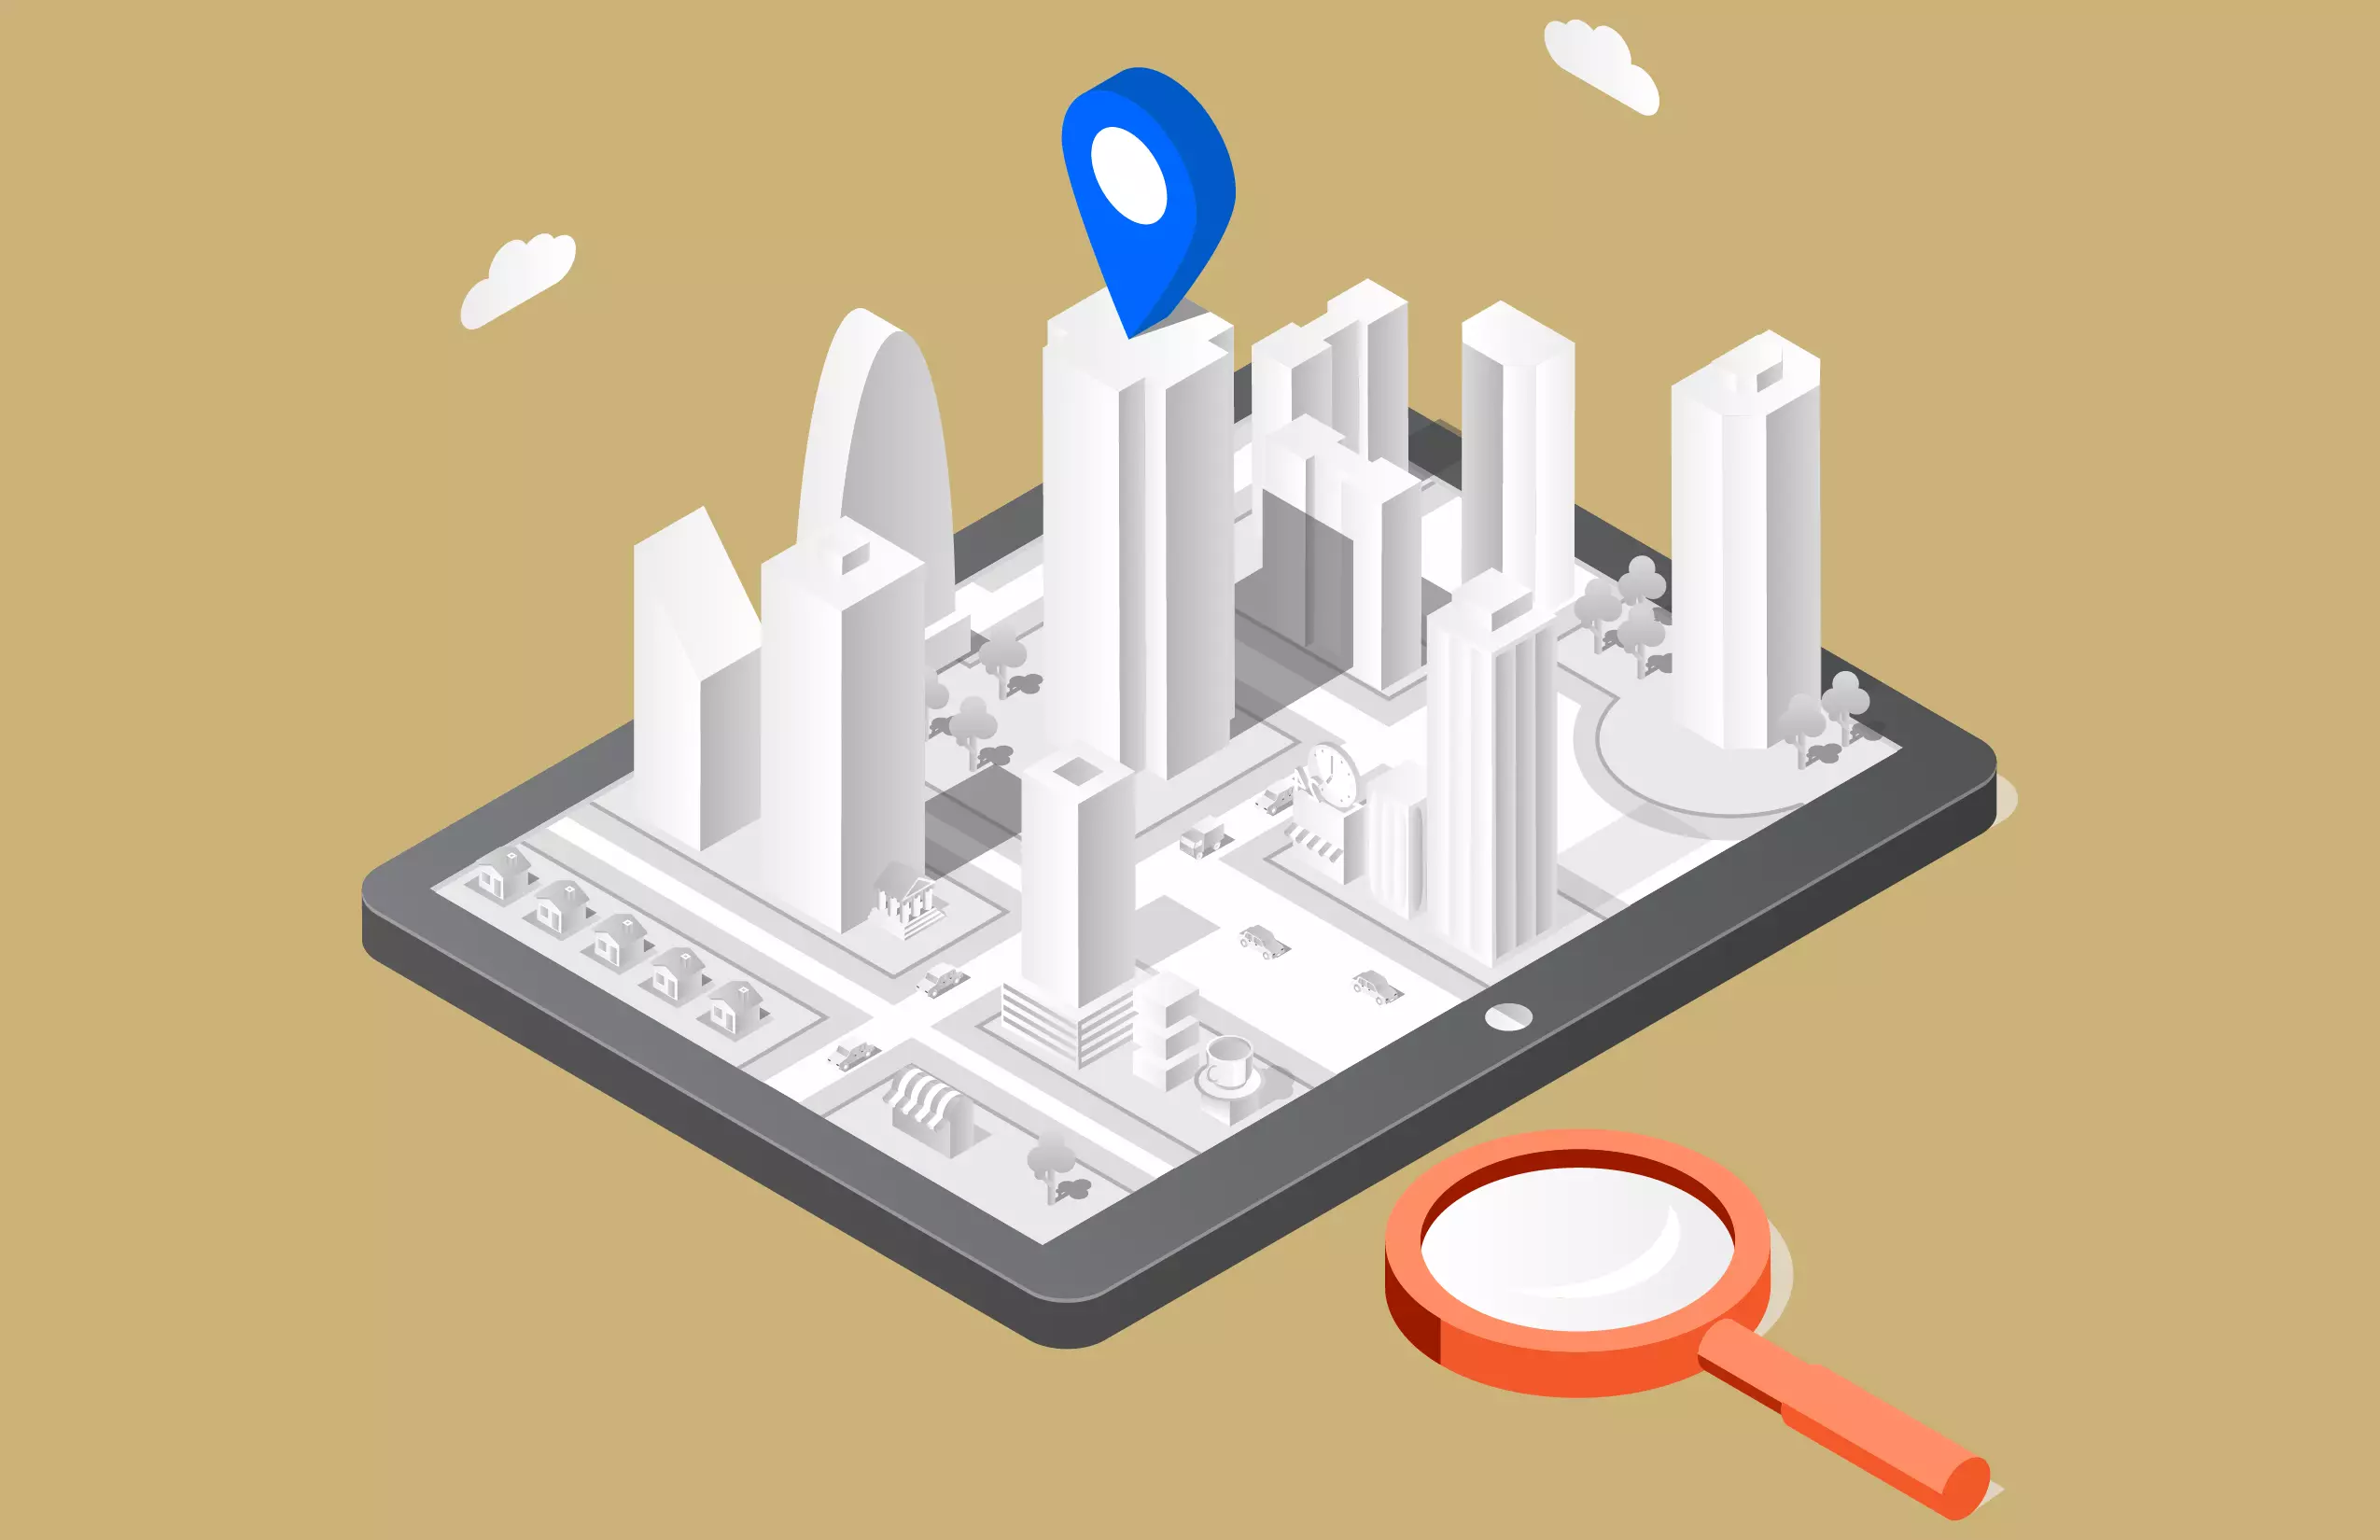 Why Is Lystloc The Best Alternative For Google Maps Timeline To Track Employees?